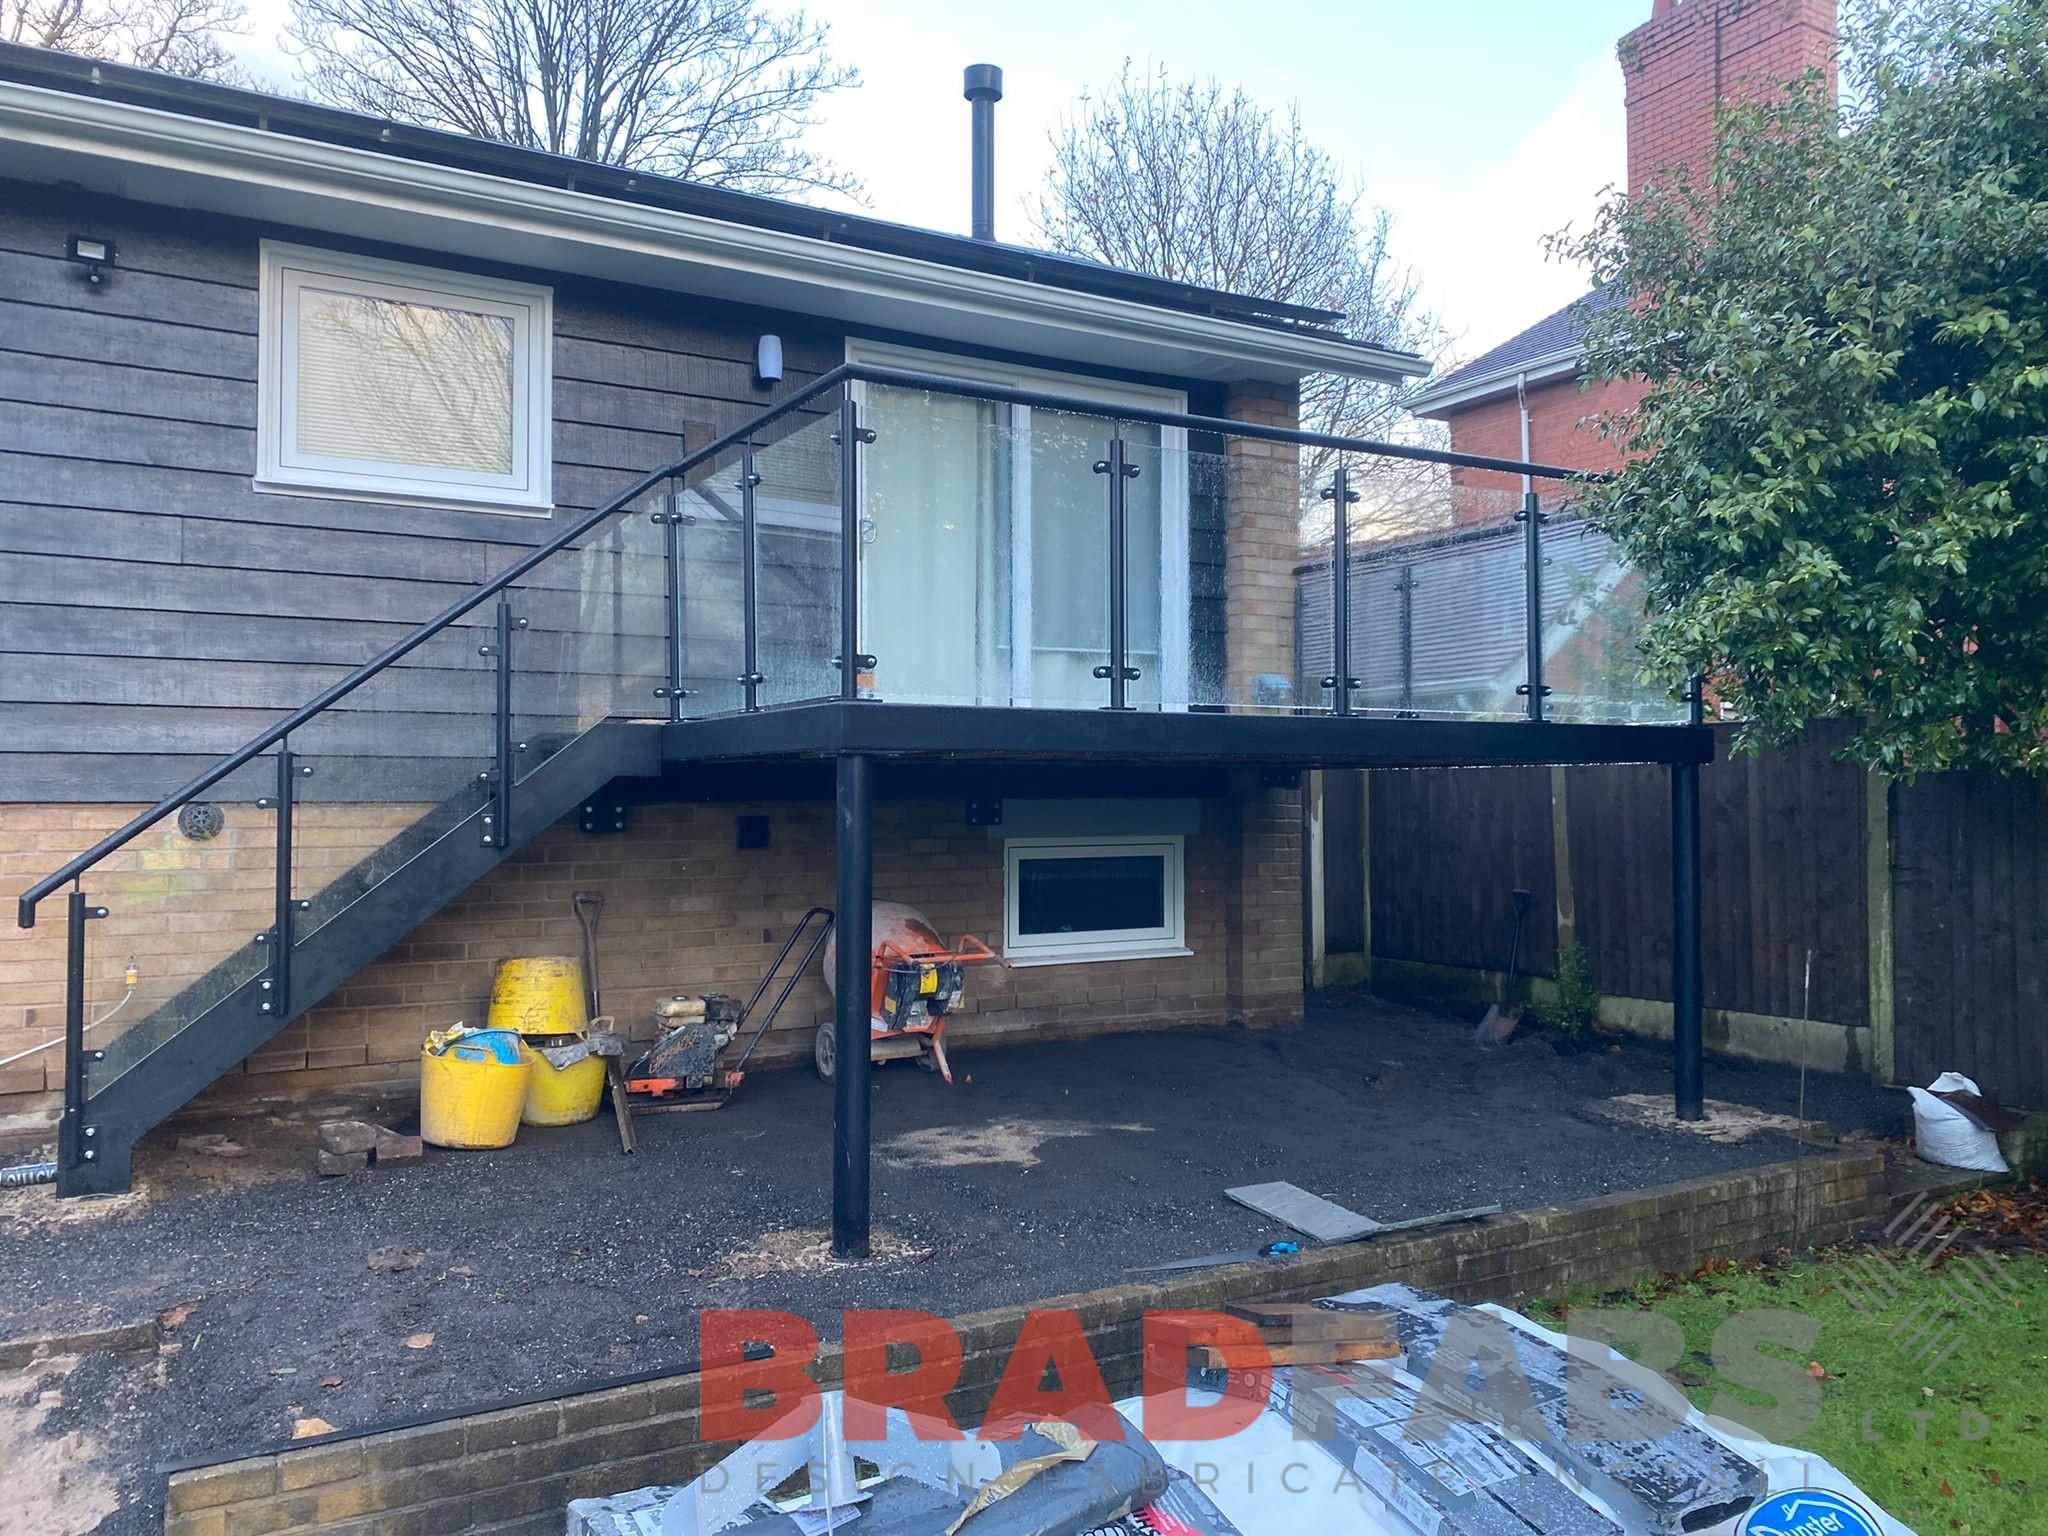 Balcony, Bradfabs, balcony with staircase, mild steel and glass balustrade, straight staircase, durbar treads, composite decking 